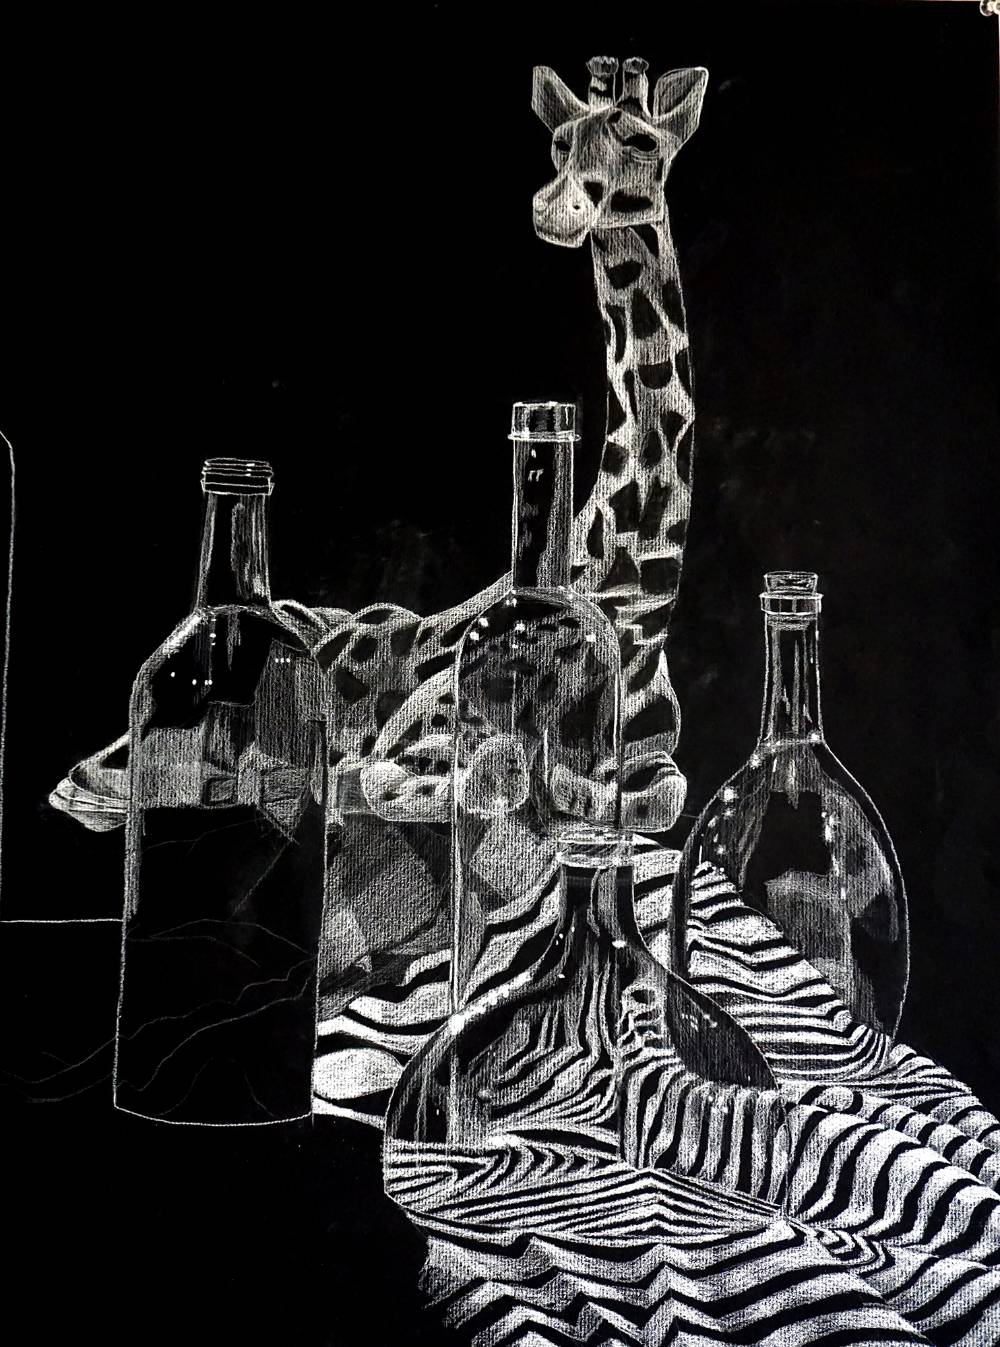 Still life drawing from ART 155 - Foundations: Intro to Drawing I, featuring a toy giraffe, fabric, and clear bottles